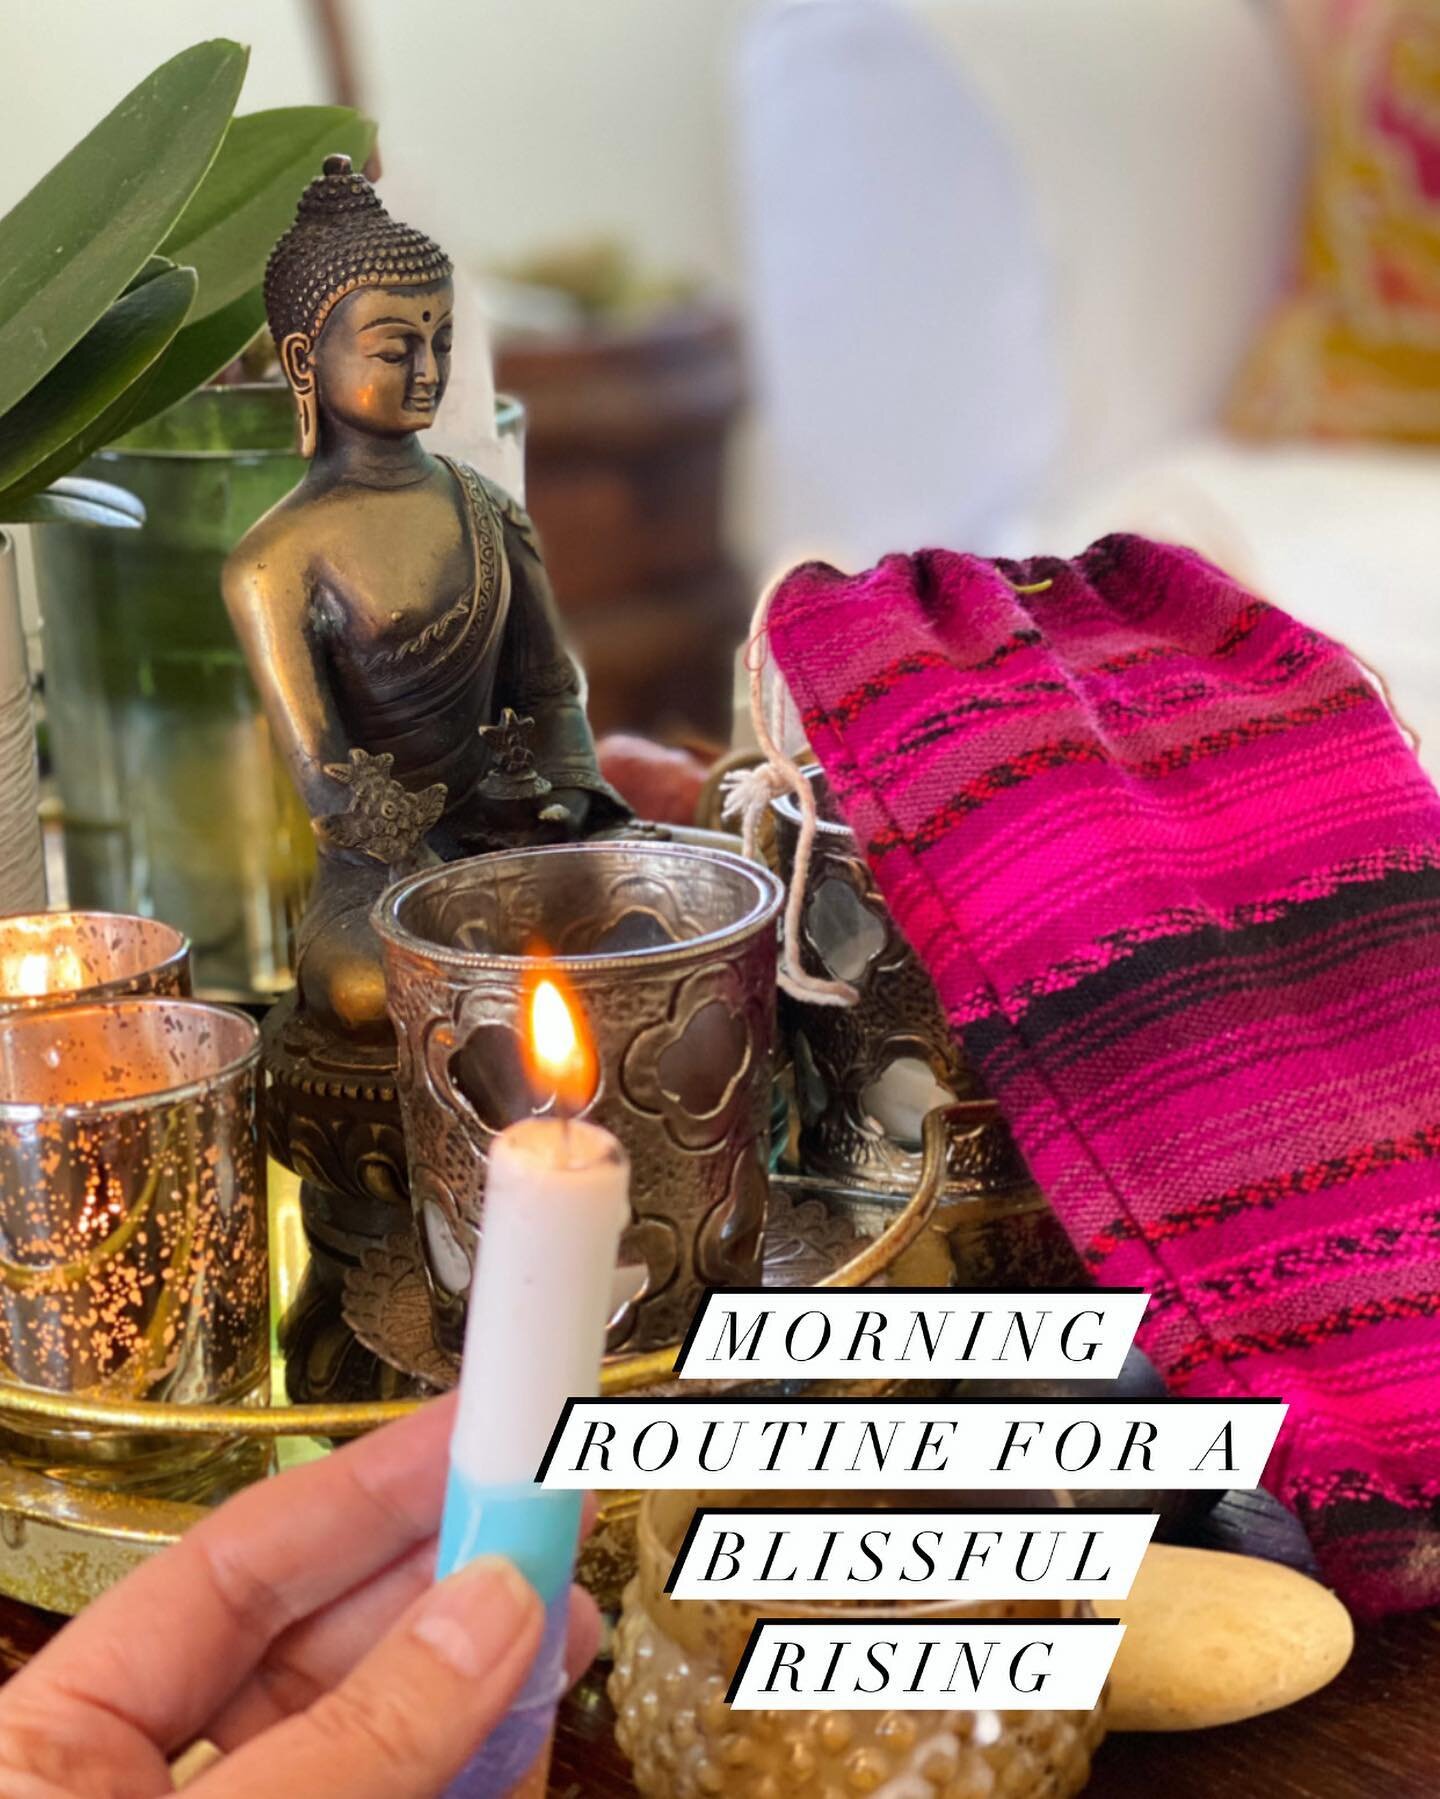 Here&rsquo;s a topic I never thought I&rsquo;d be &ldquo;an expert&rdquo; on!!
﻿
﻿I figured out my AM groove during the pandemic.
﻿
﻿It involves delicious Mayan @legacycacao,  binaural beats on Ananda app, meditation with a stone in each hand, a cand